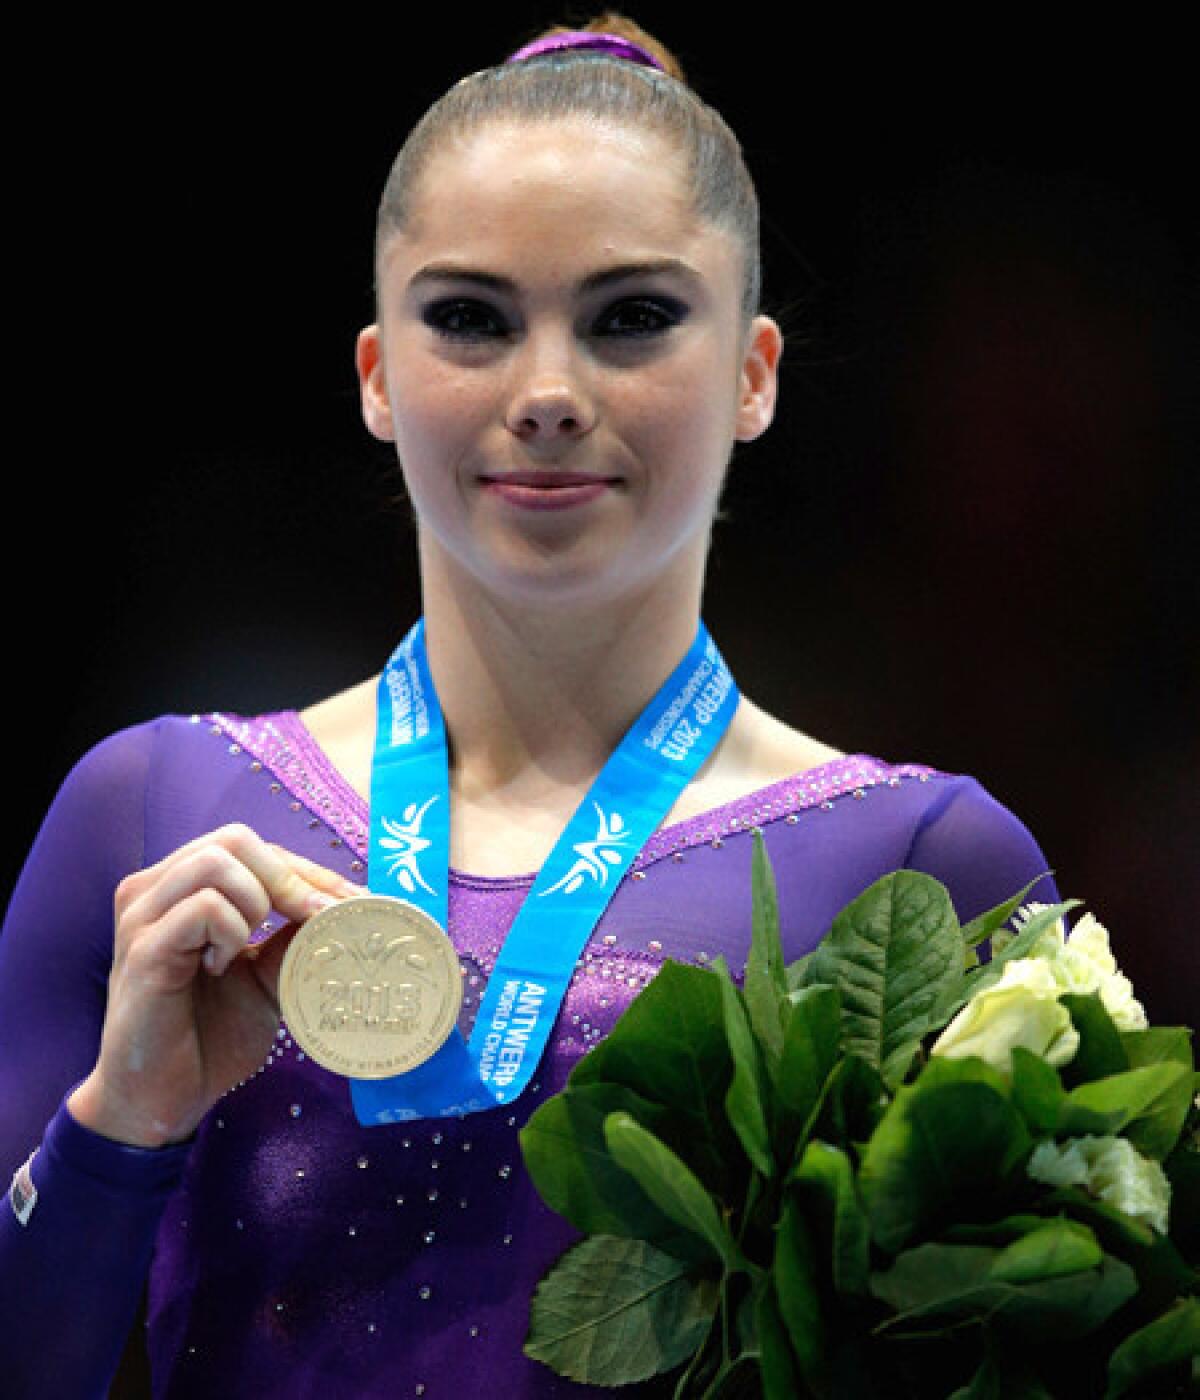 American McKayla Maroney poses with the gold medal after winning the women's vault final at the world championships on Saturday.